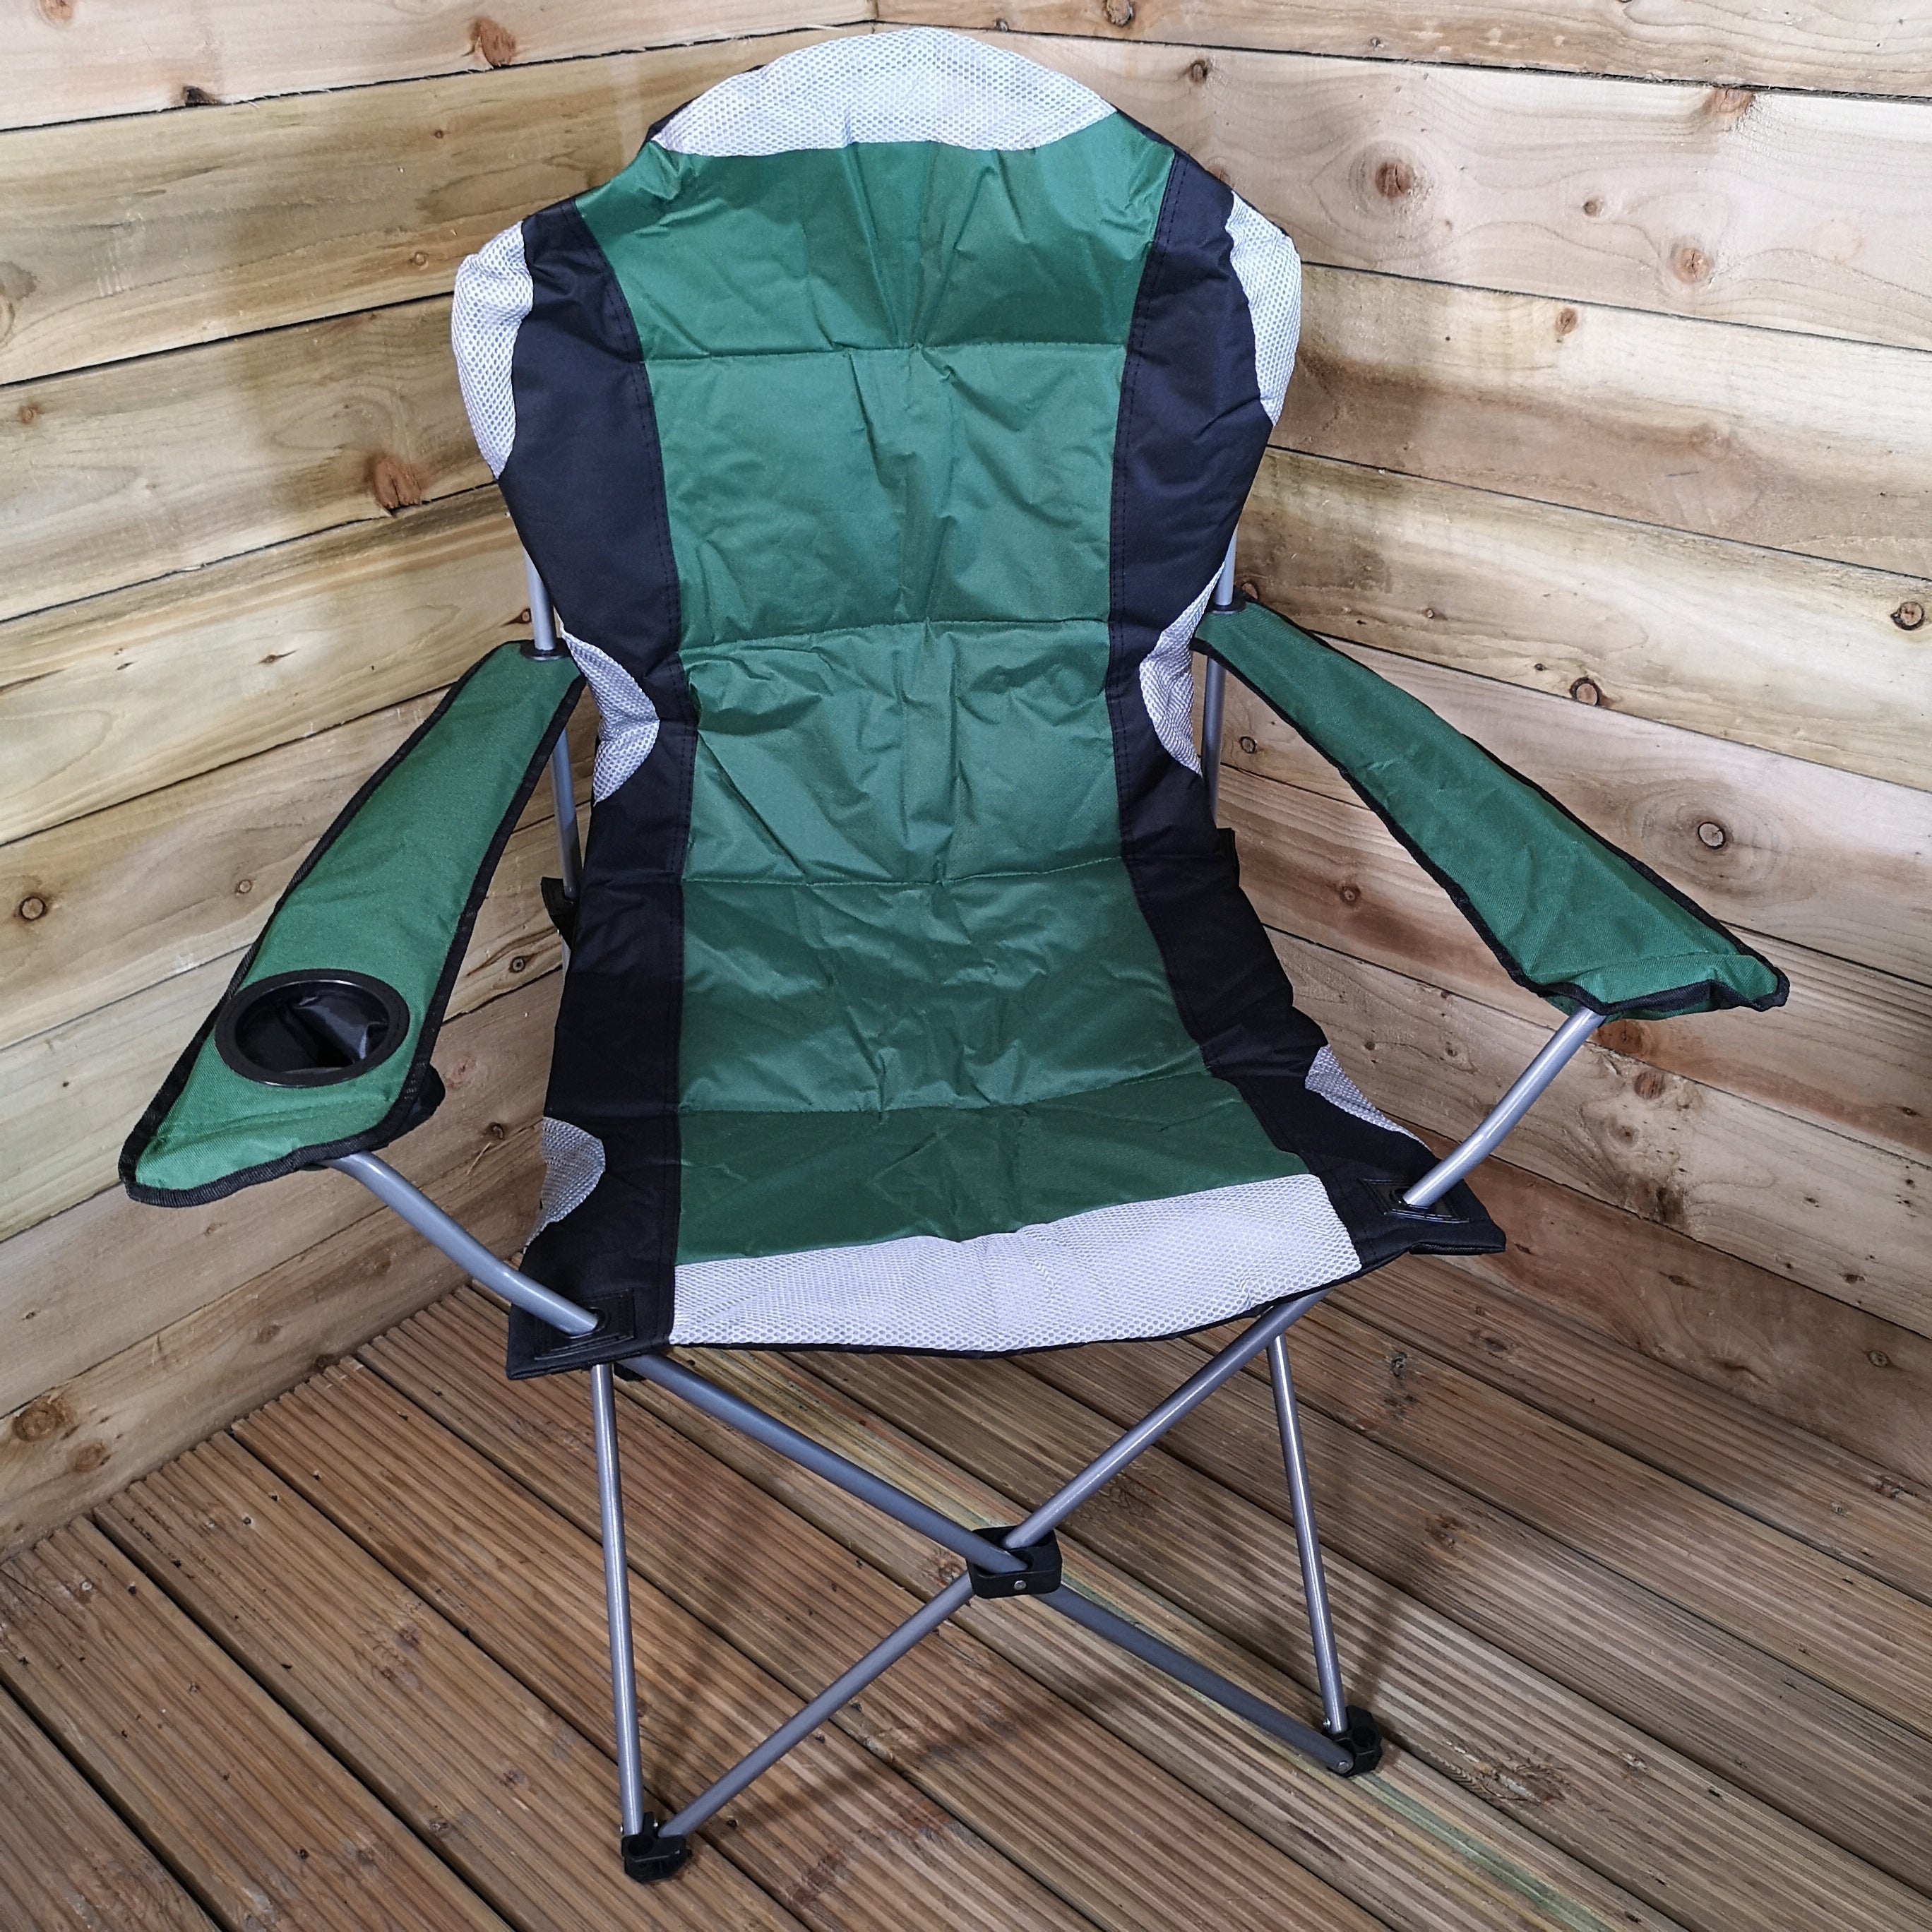 Samuel Alexander Luxury Padded High Back Folding Outdoor Camping Fishing Chair in Green